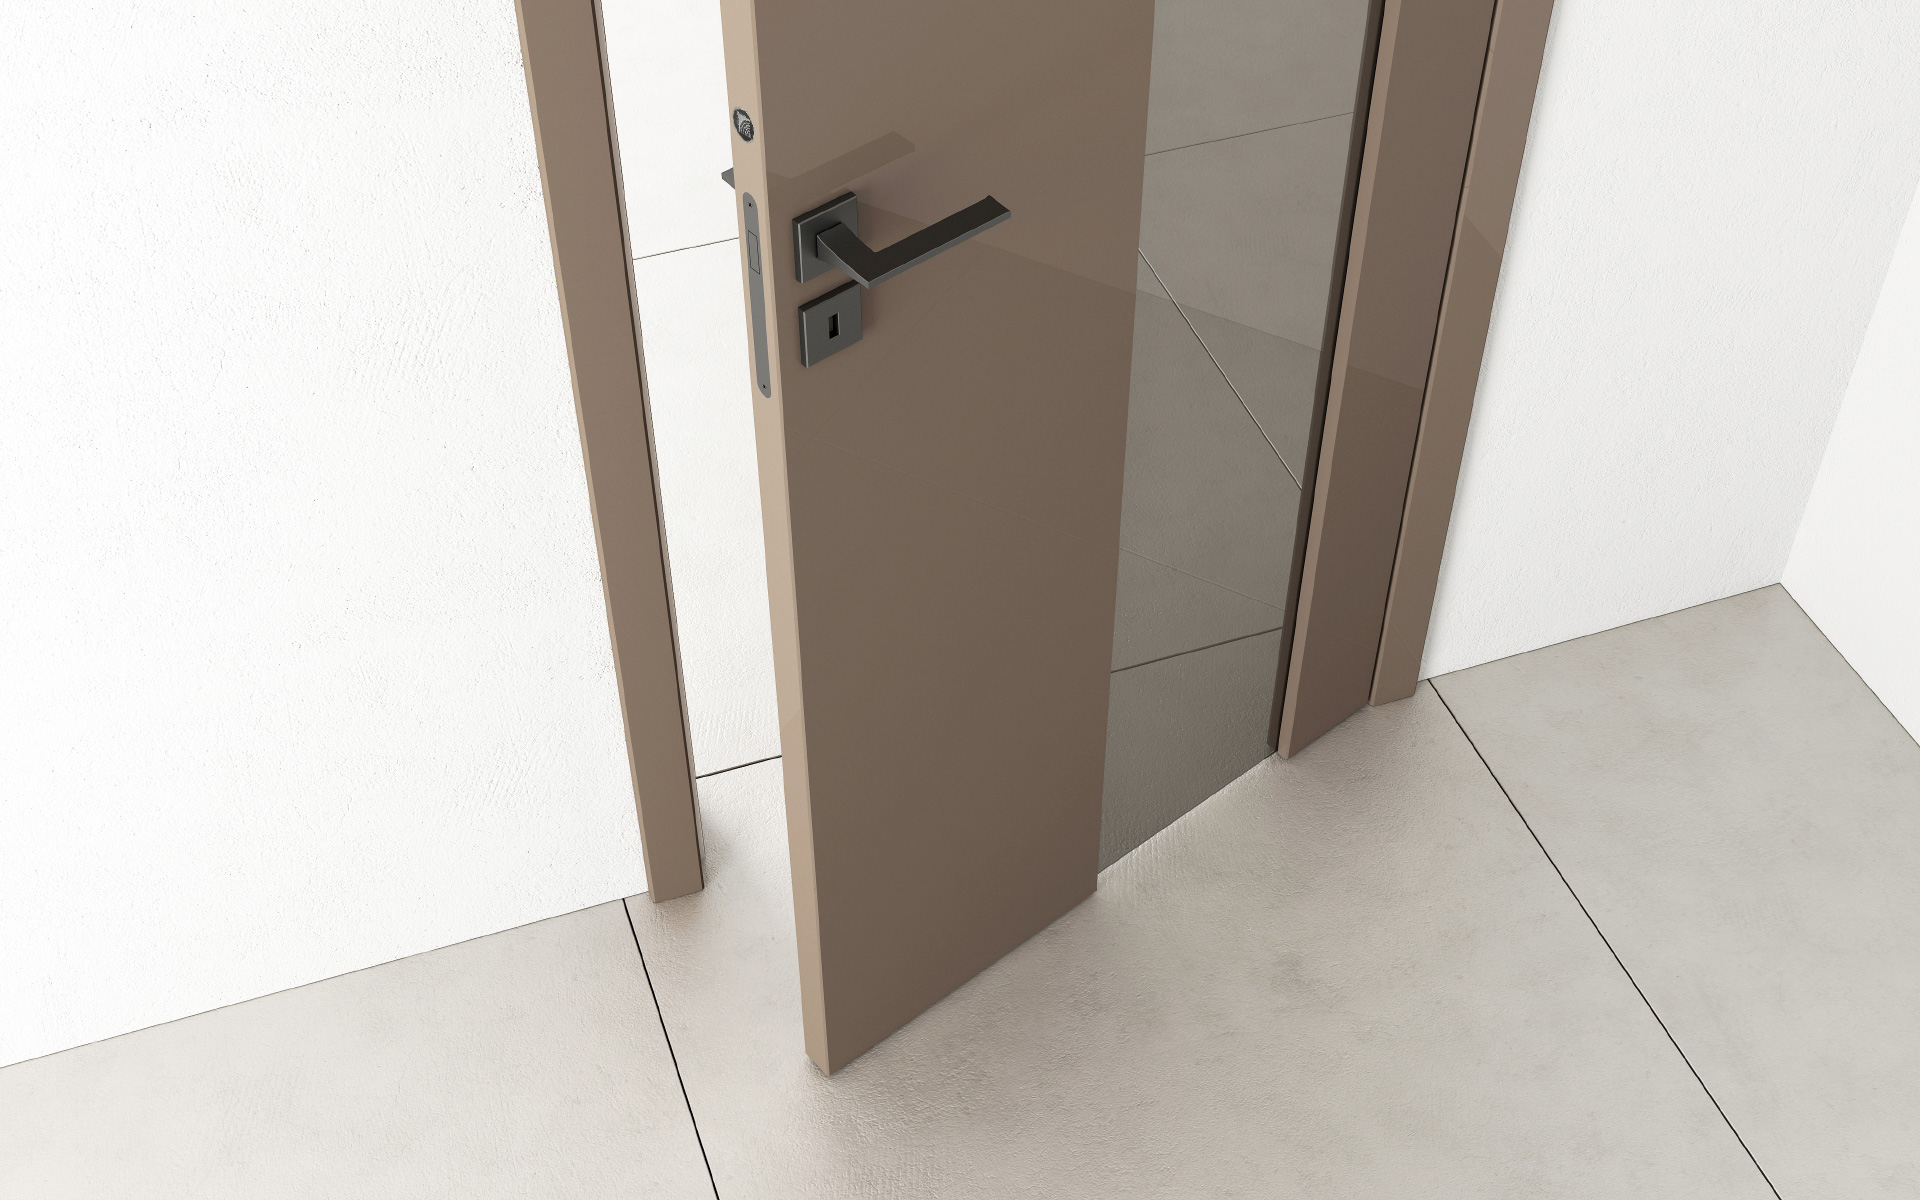 SPIRIT glazed door with a frameless fastening system for the glass panel.